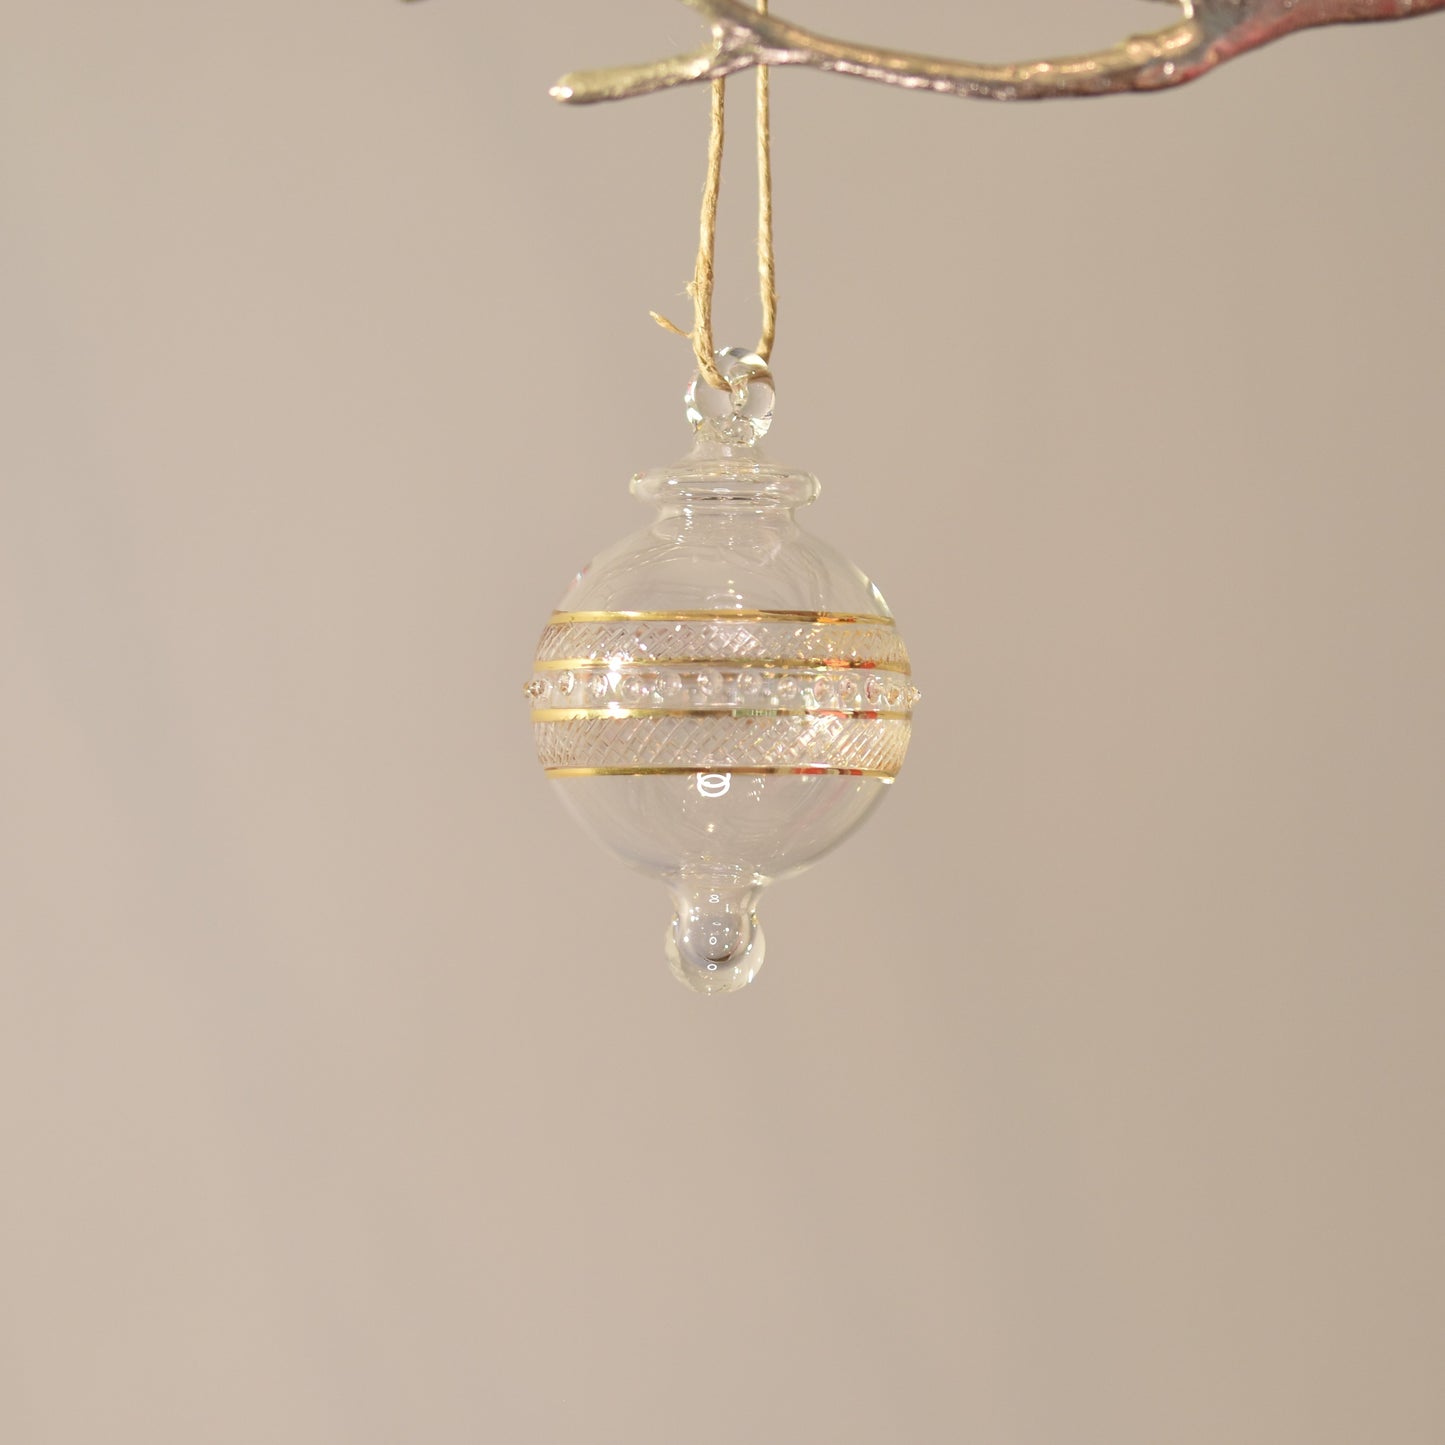 Infinity Handblown Glass Bauble - Gold & Clear - Small